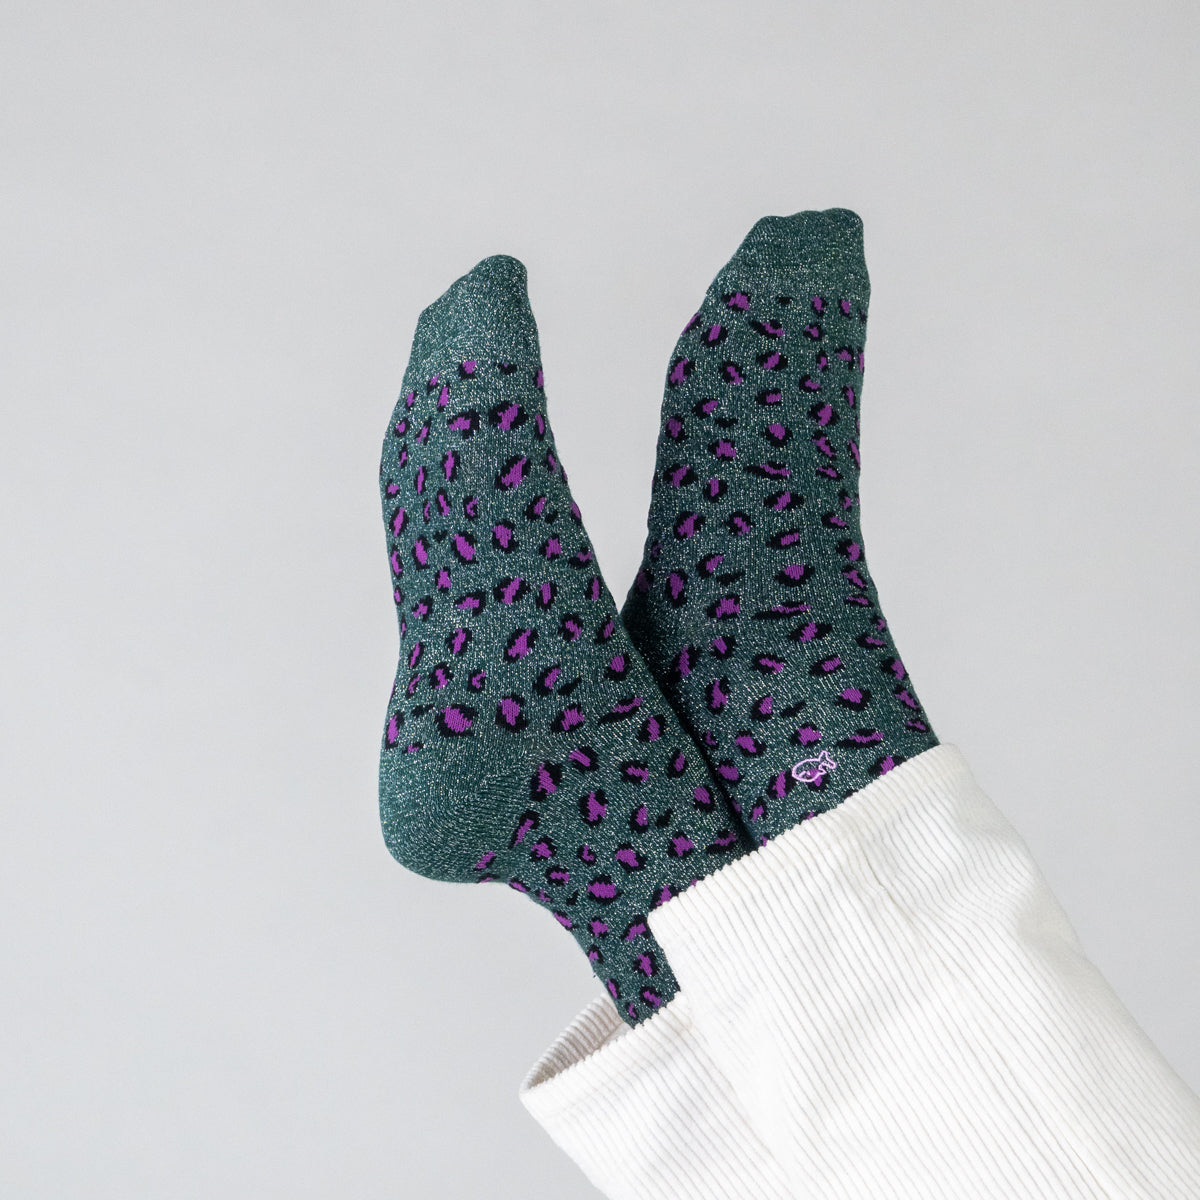 Socks in combed cotton Leopard - Green and purple